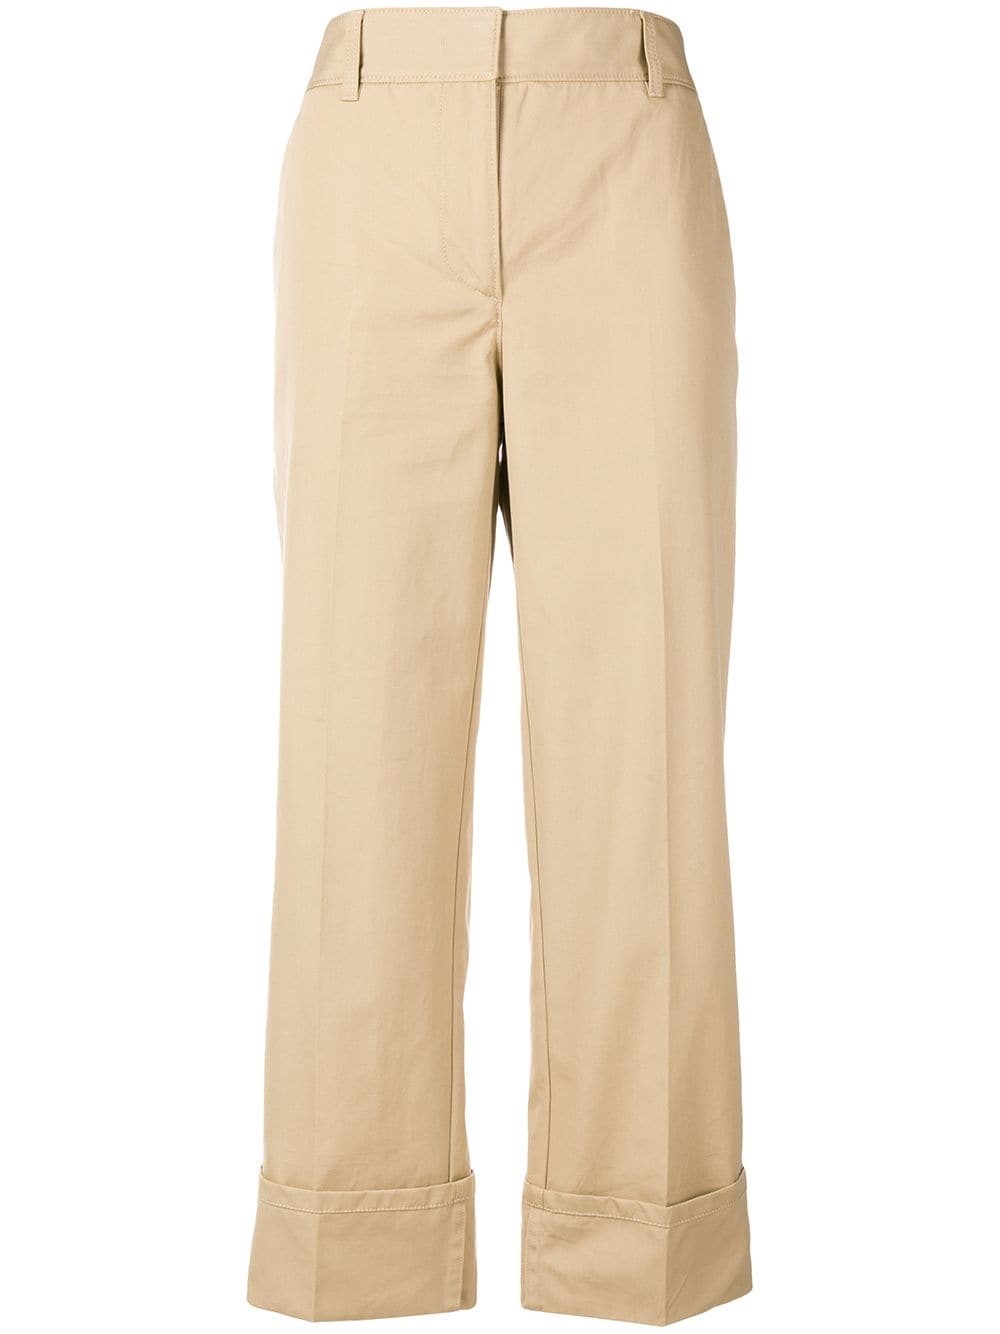 prada TROUSERS available on montiboutique.com - 26288